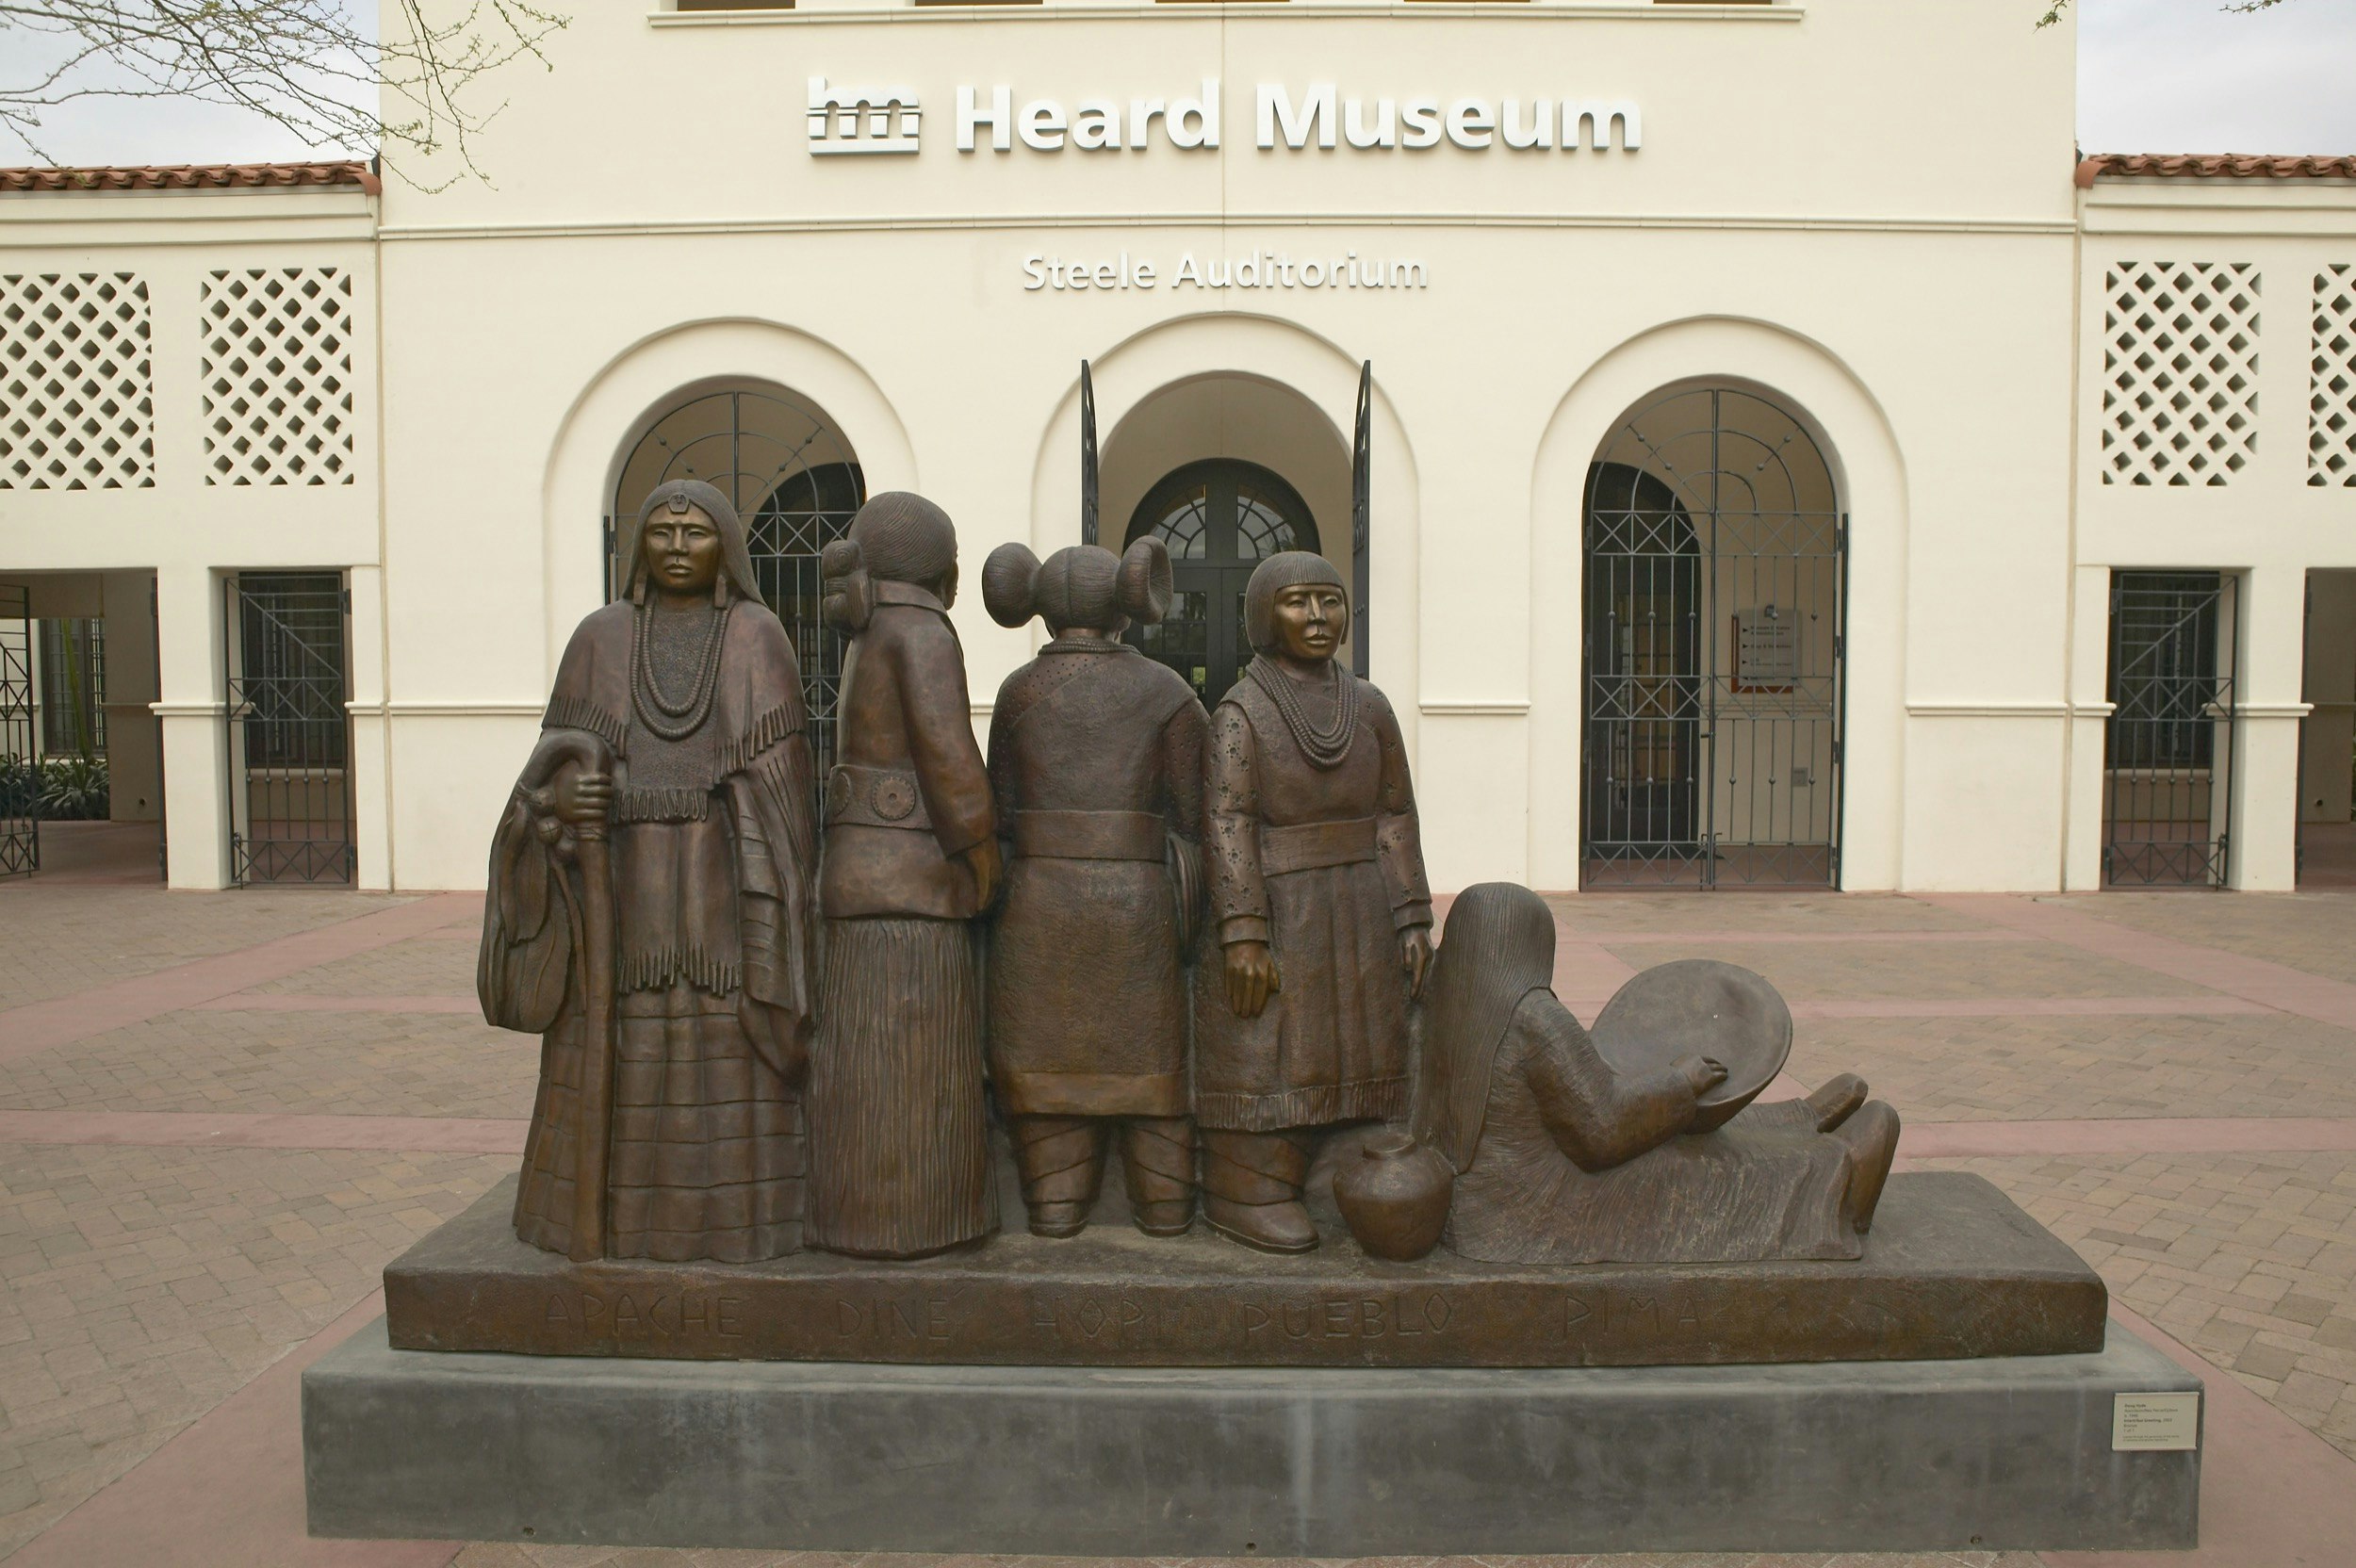 A statue featuring four Native American women stands in front of the entrance to the Heard Museum